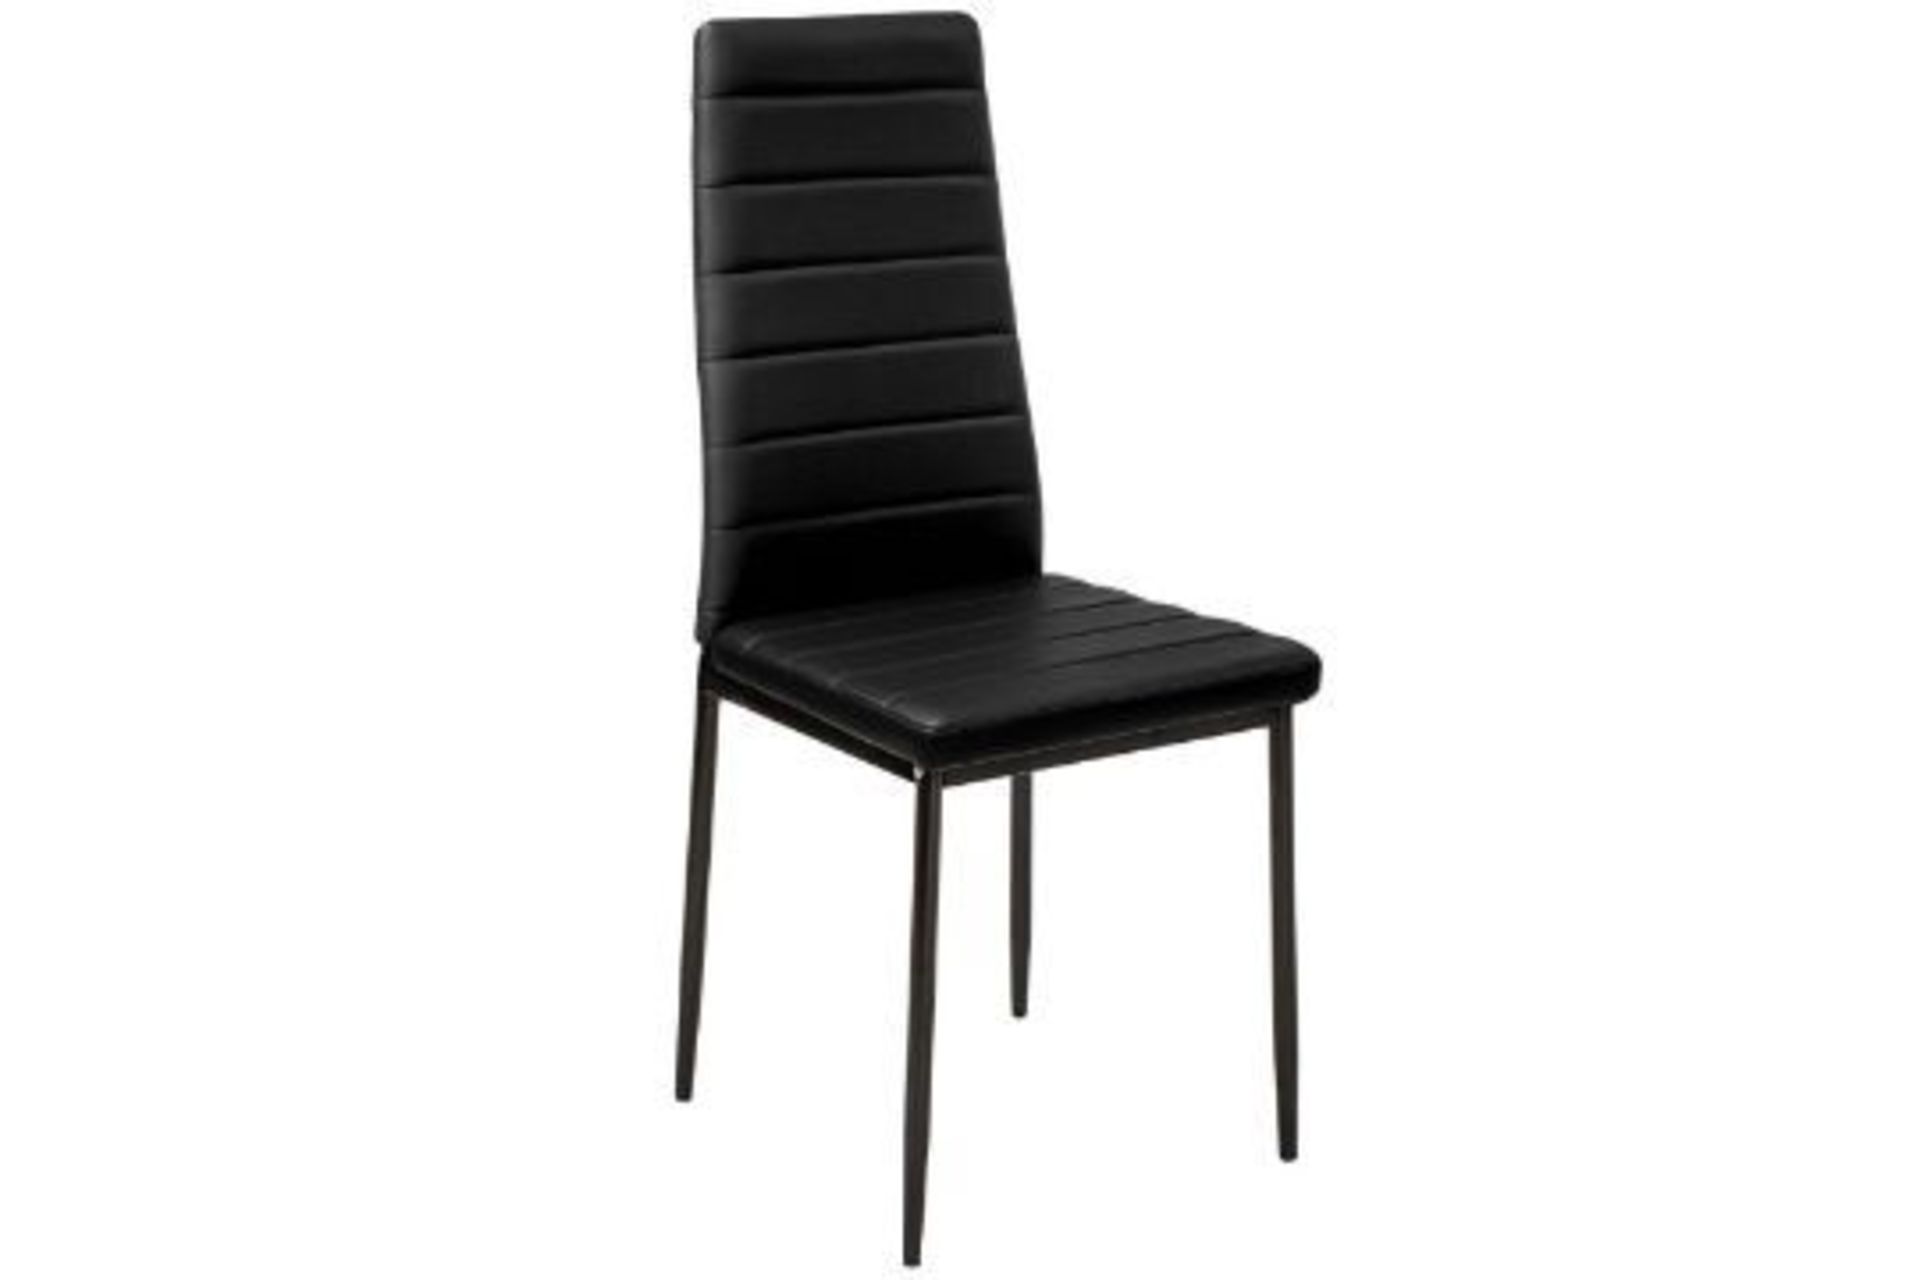 PALLET TO CONTAIN 24 X NEW BOXED Modern Synthetic Leather Dining Chairs In Black. RRP £99.99 each, - Image 2 of 6